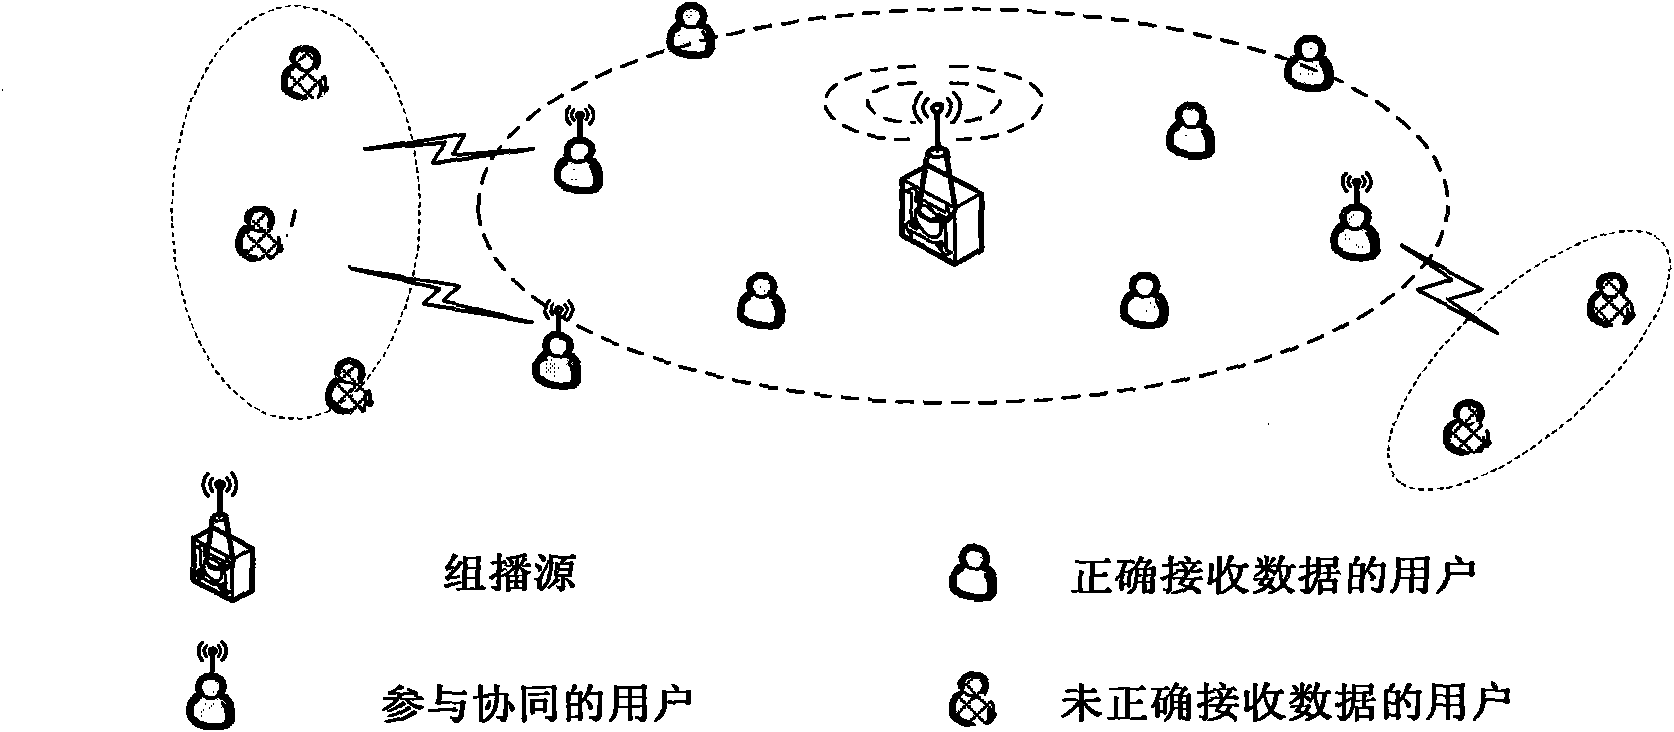 Three-step distributed wireless cooperative multicast/broadcast method